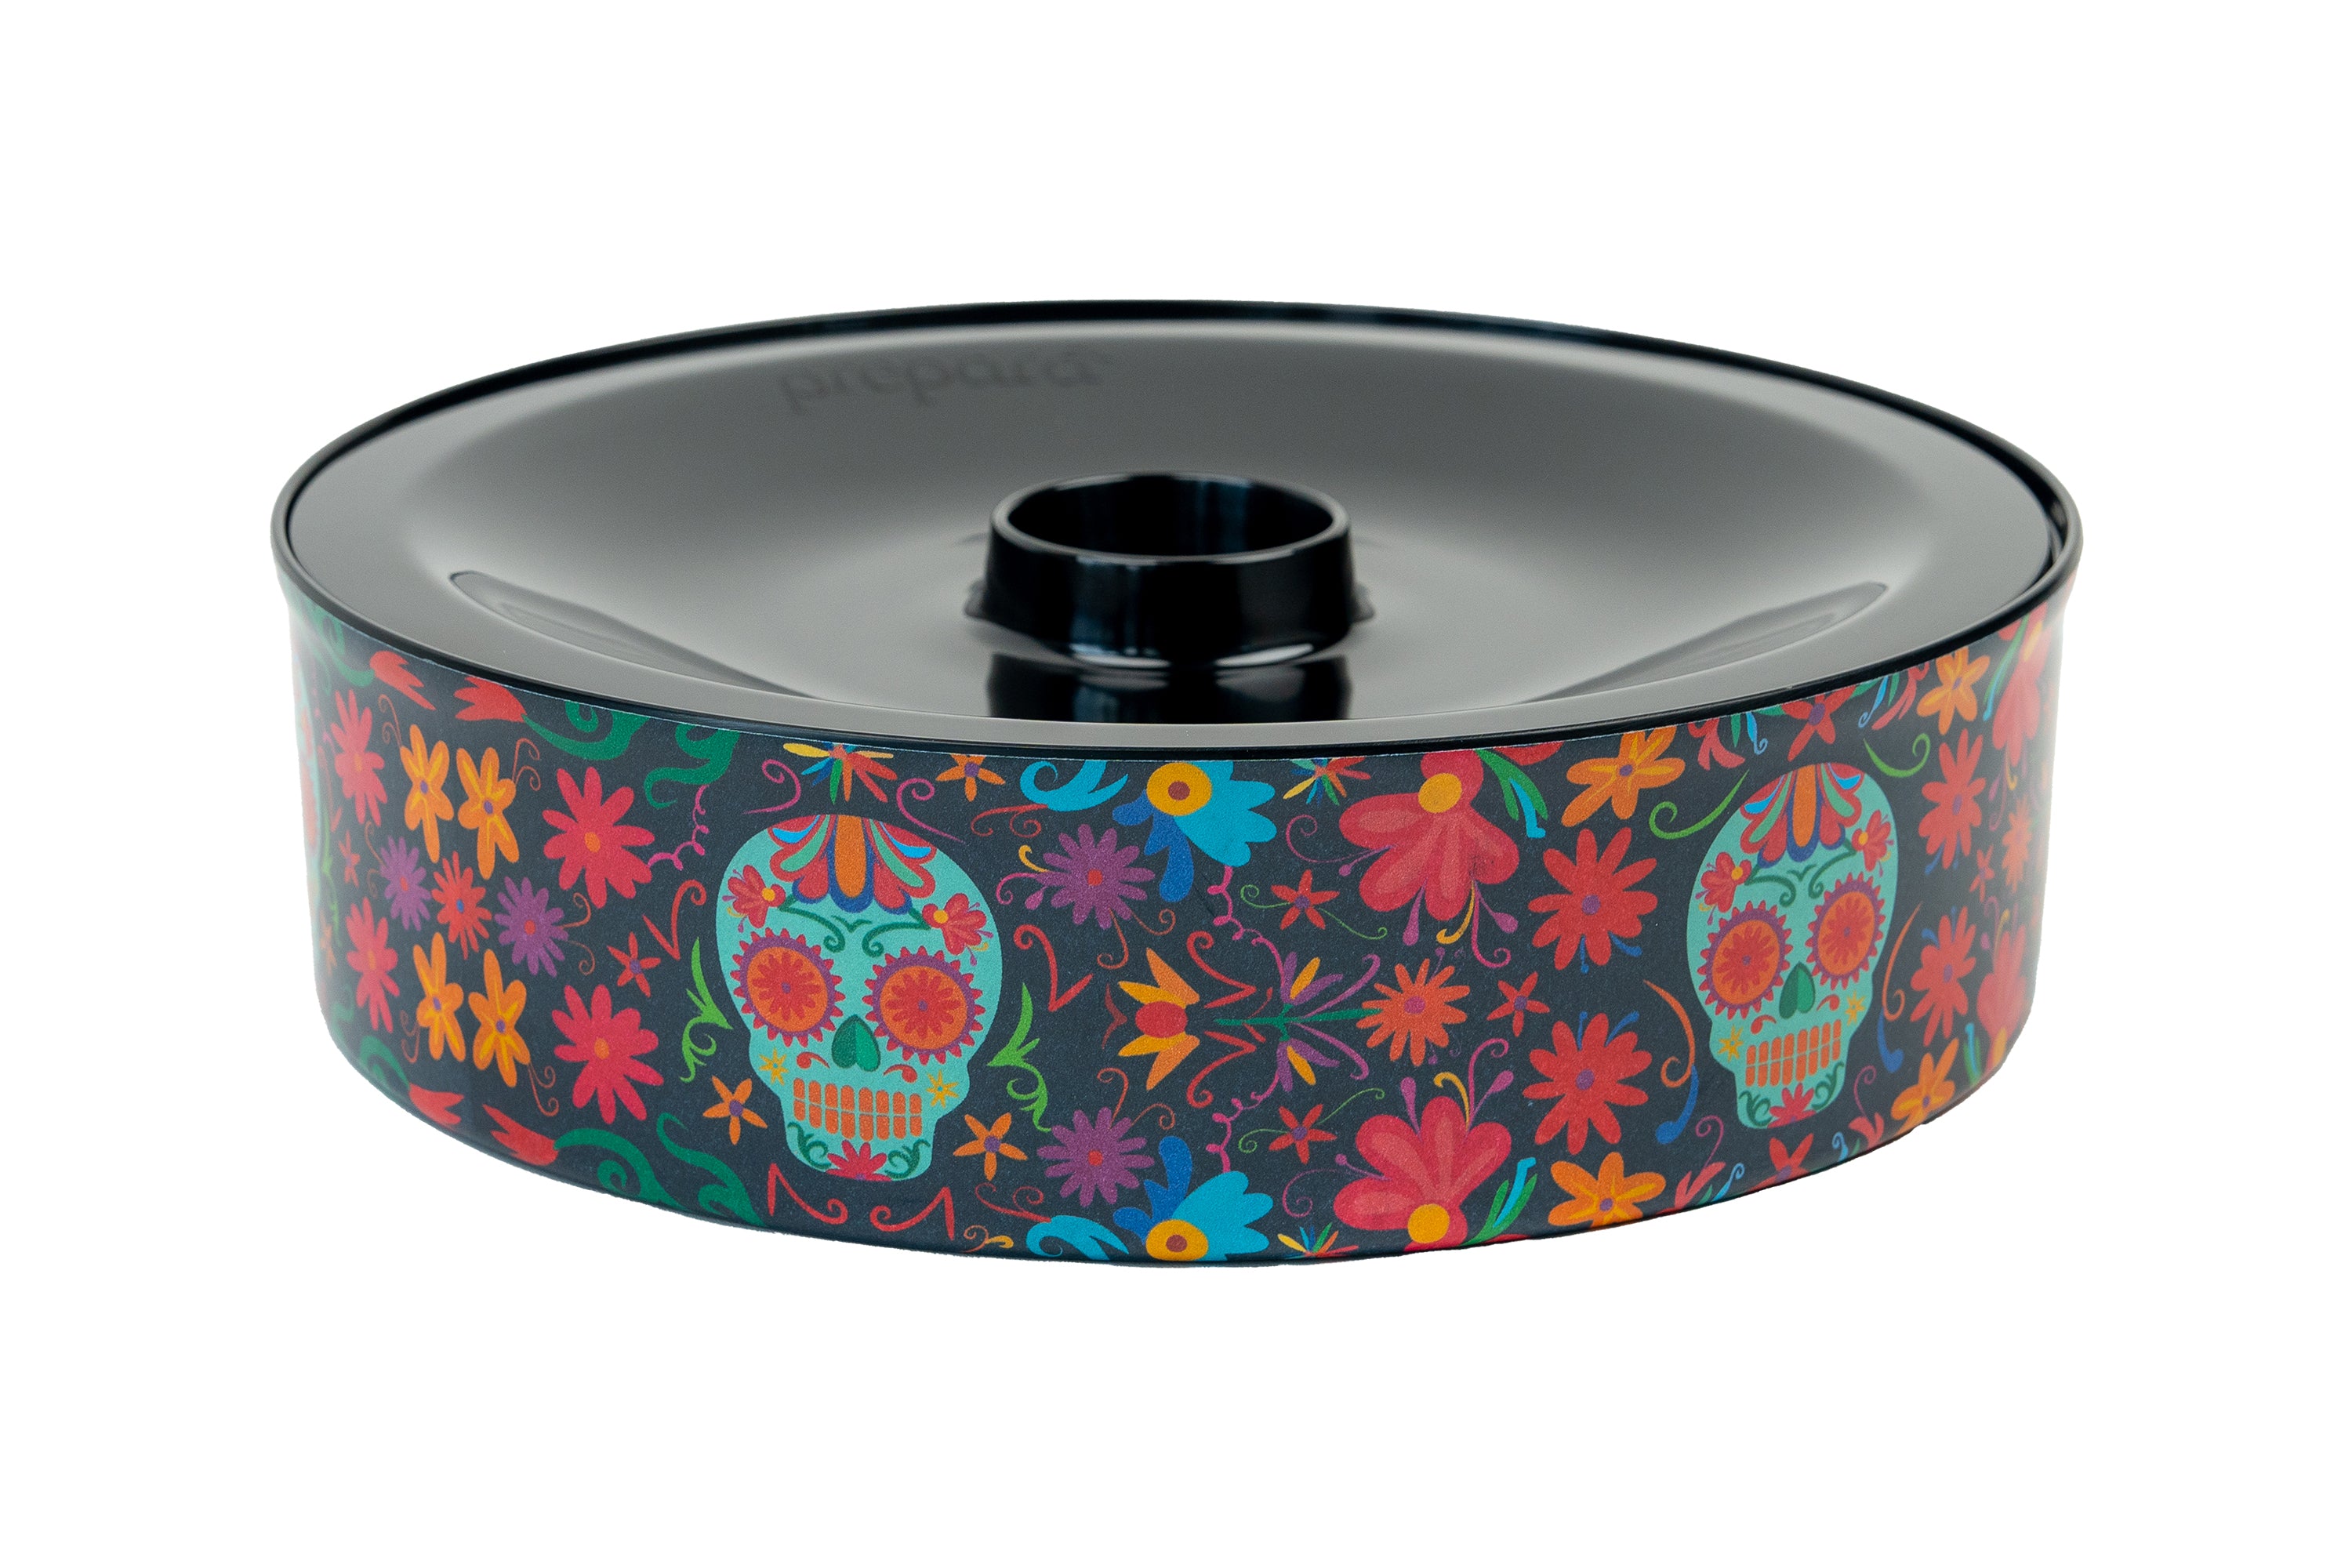 Tortilla Holder｜DAY OF THE DEAD EDITION